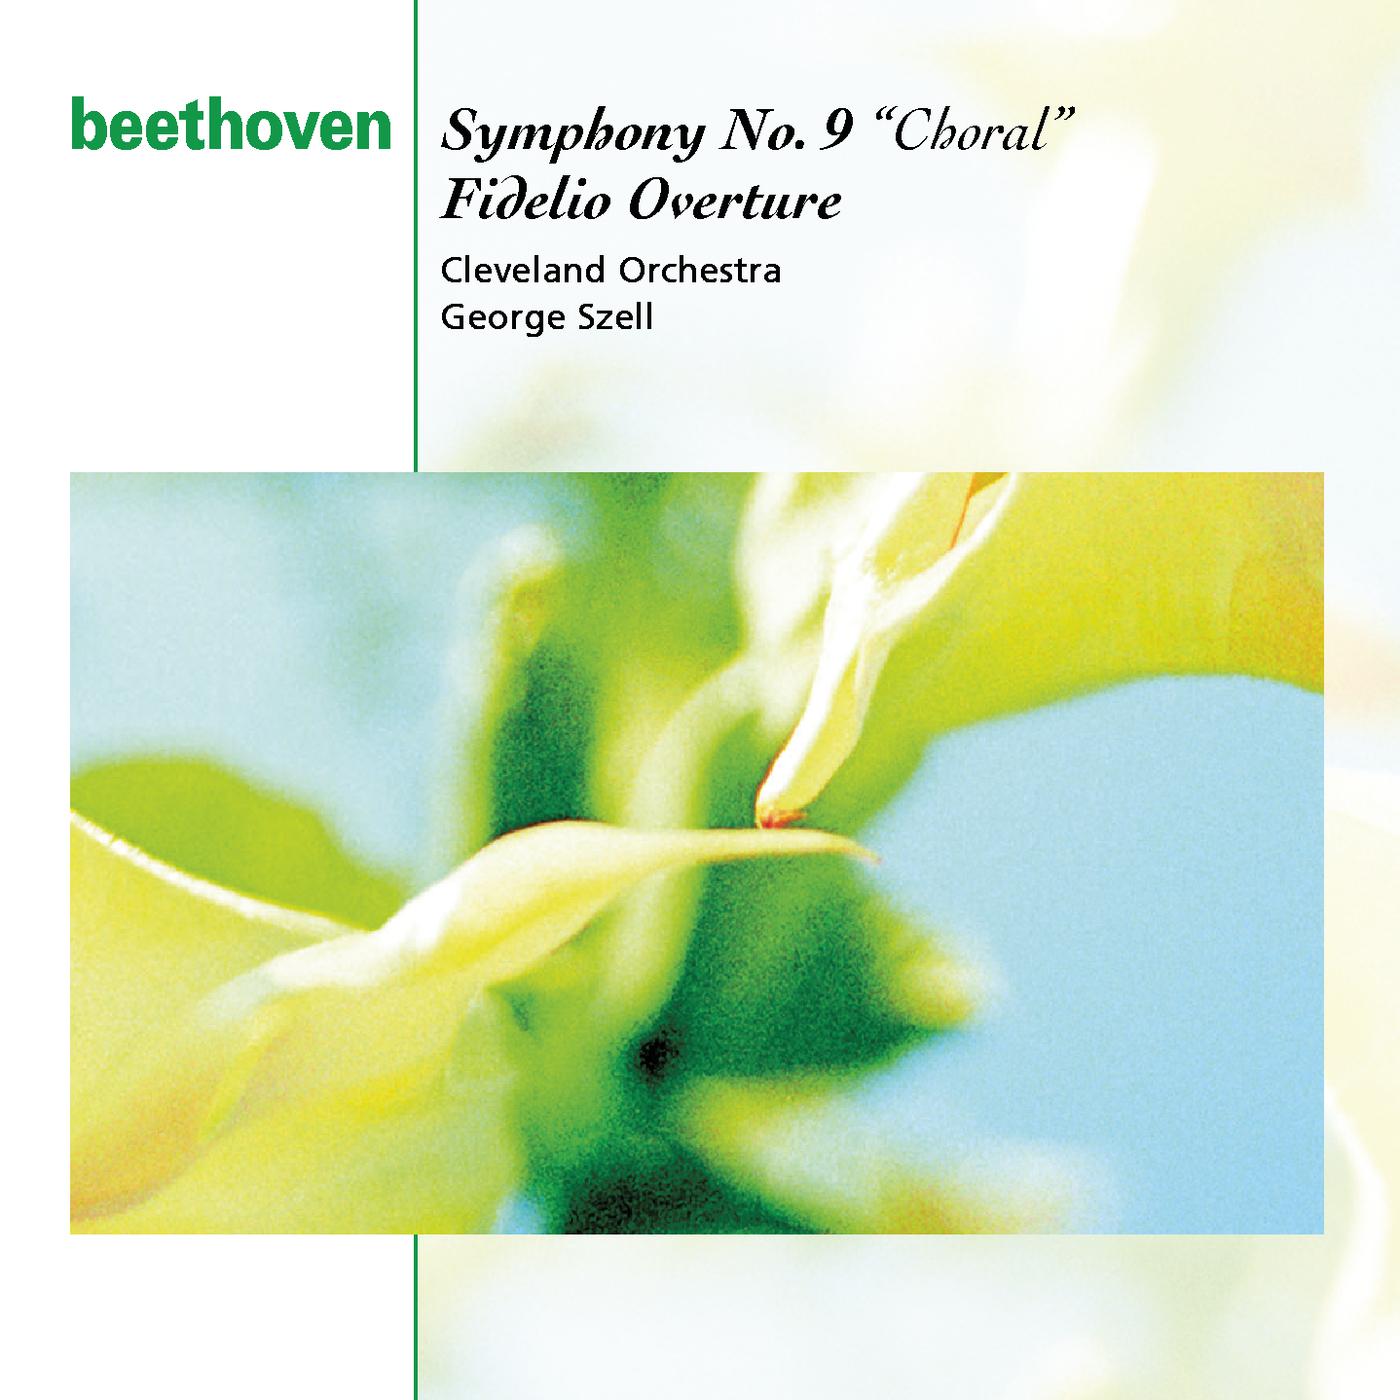 Beethoven: Symphony No. 9 "Choral" & Fidelio Overture